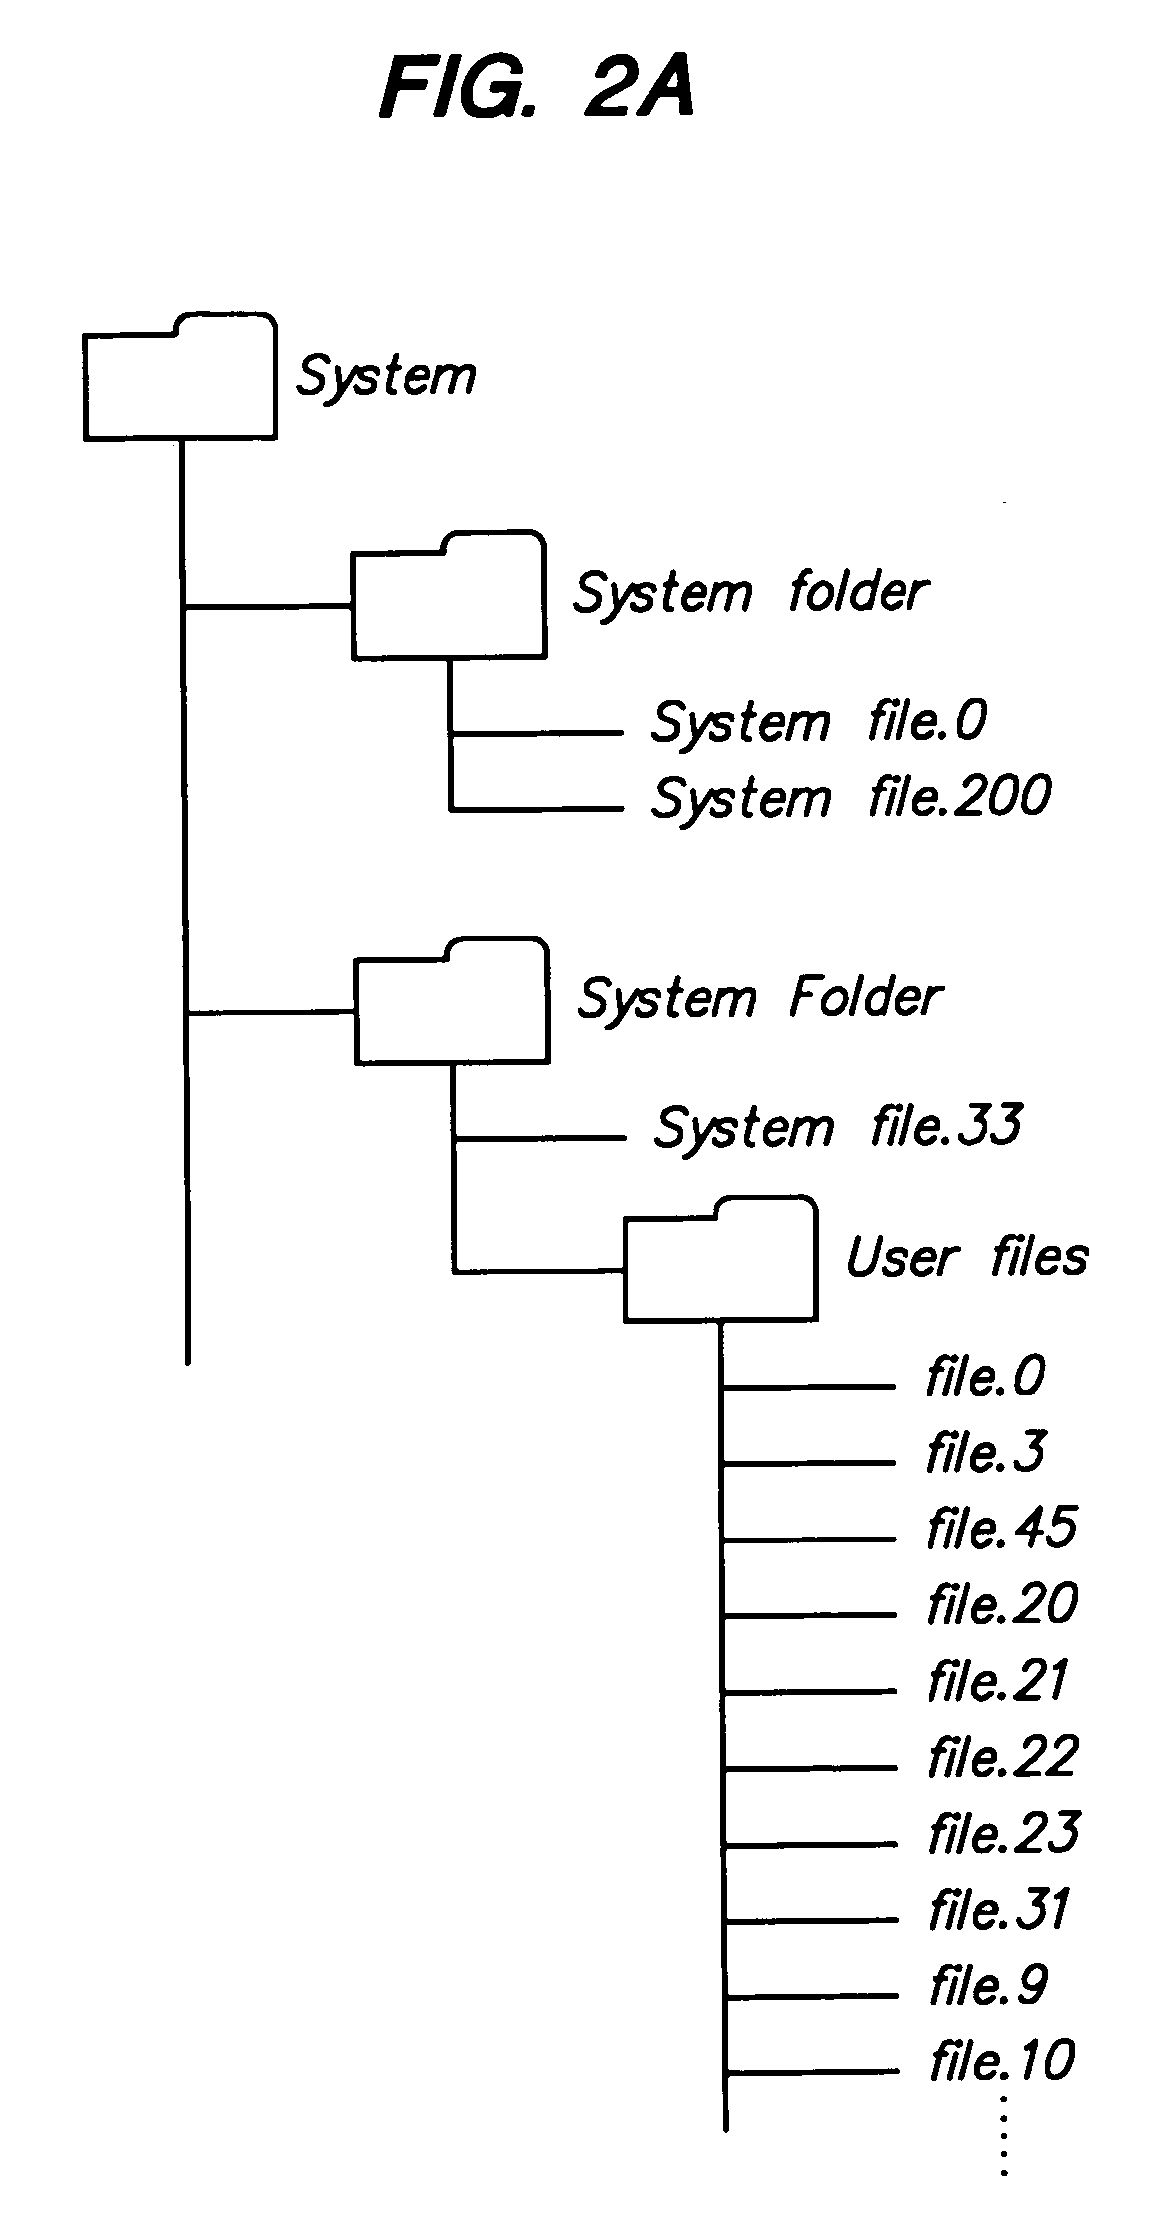 Method and apparatus for automatic file clustering into a data-driven, user-specific taxonomy